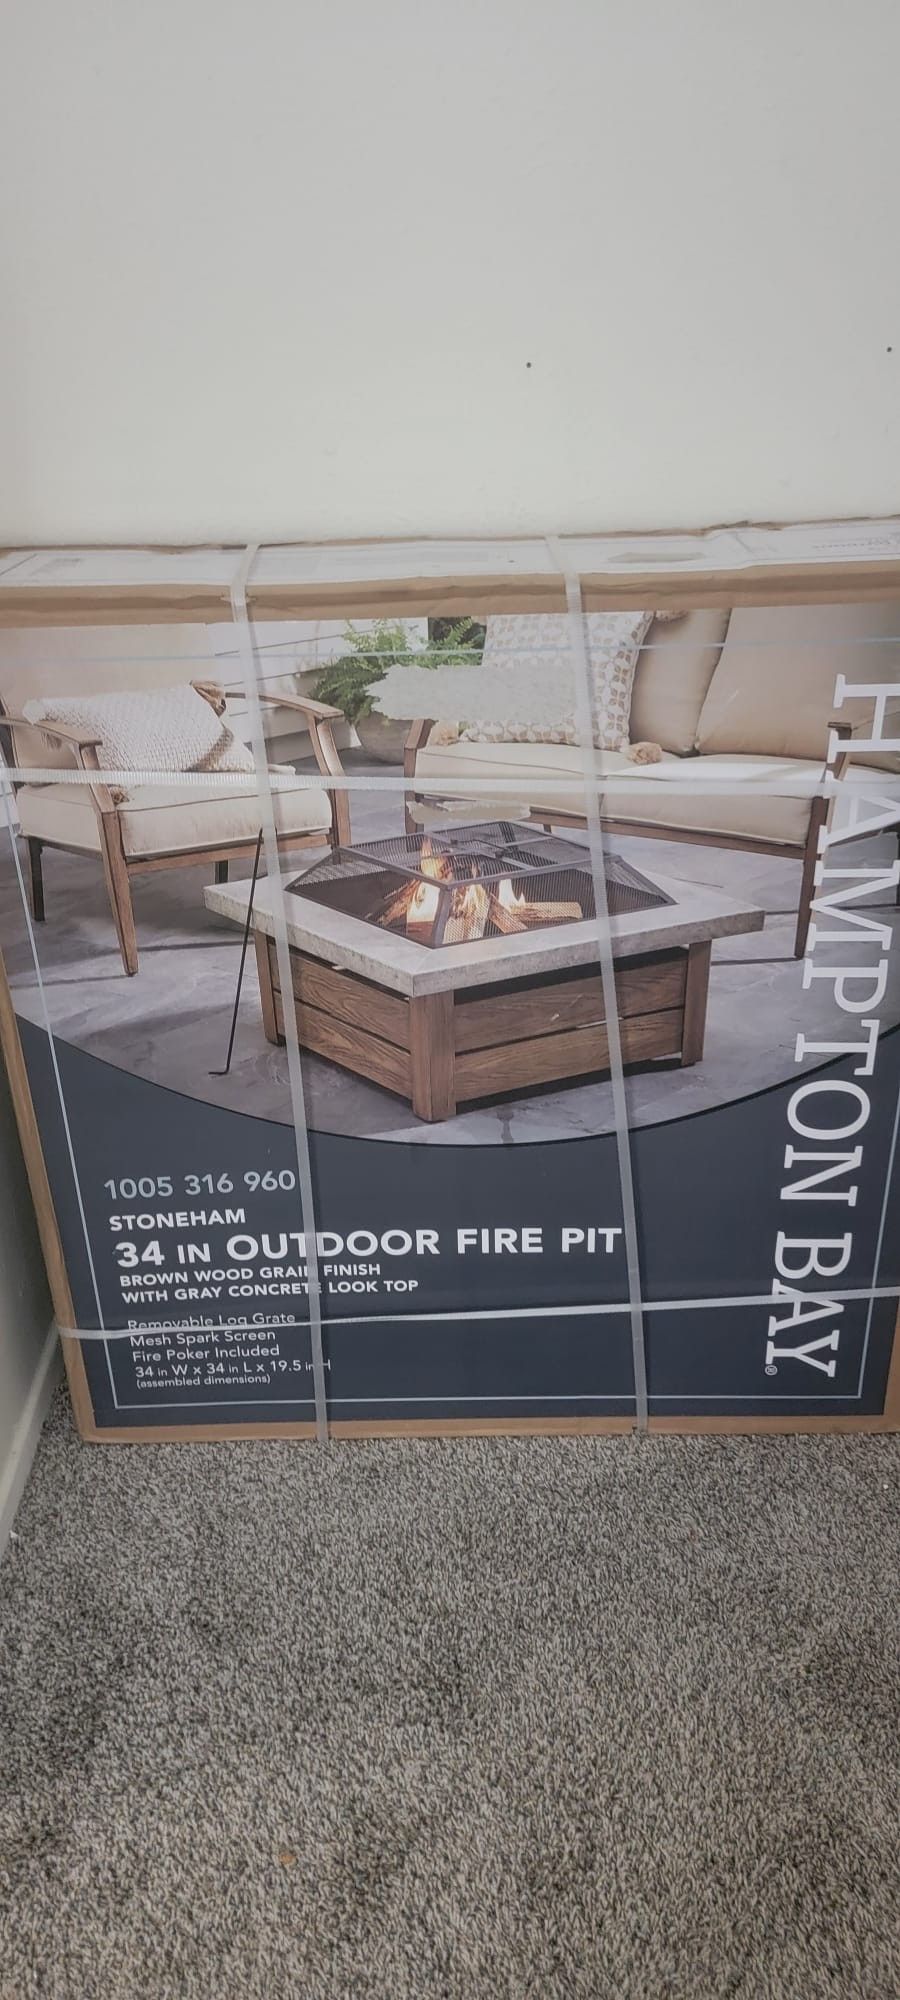 StoneHam Outdoor Fire Pit 34 Inch X 19.5 H